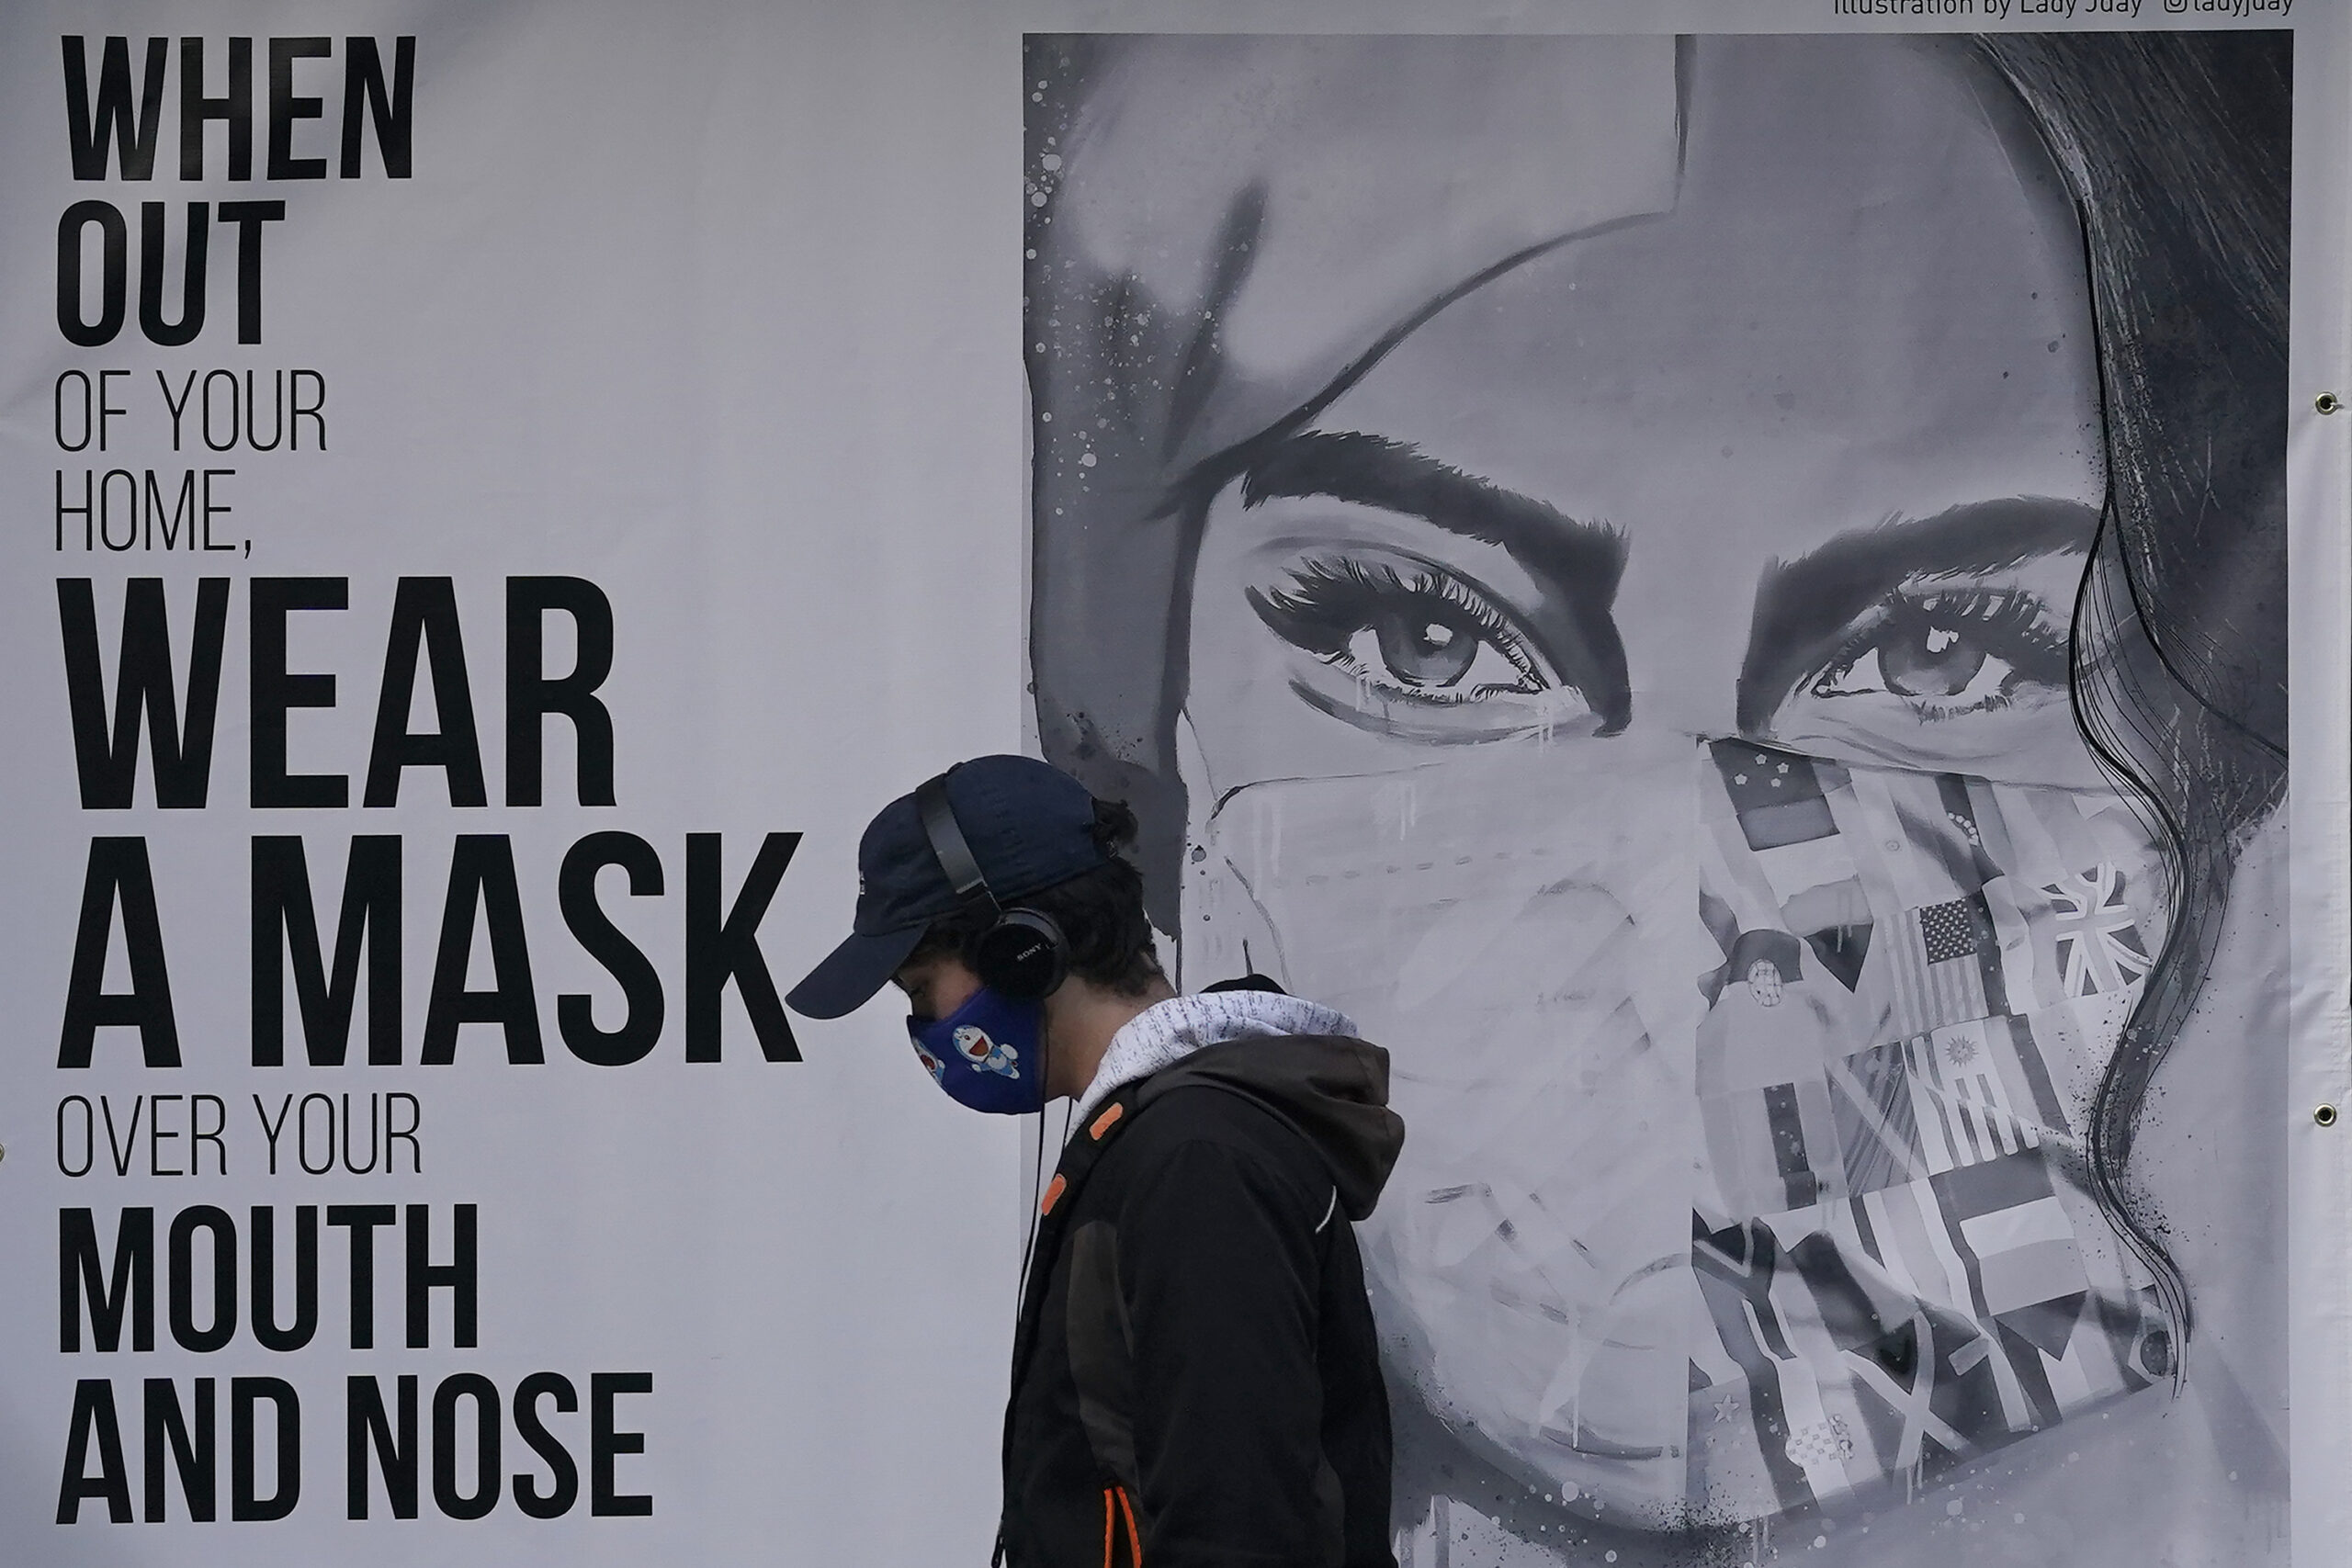 FILE - In this Nov. 21, 2020, file photo, a pedestrian walks past a mural reading: "When out of your home, Wear a mask over your mouth and nose," during the coronavirus outbreak in San Francisco. From speculation that the coronavirus was created in a lab to a number of hoax cures, an overwhelming amount of false information about COVID-19 has followed the virus as it circled the globe over the past year. (AP Photo/Jeff Chiu, File)